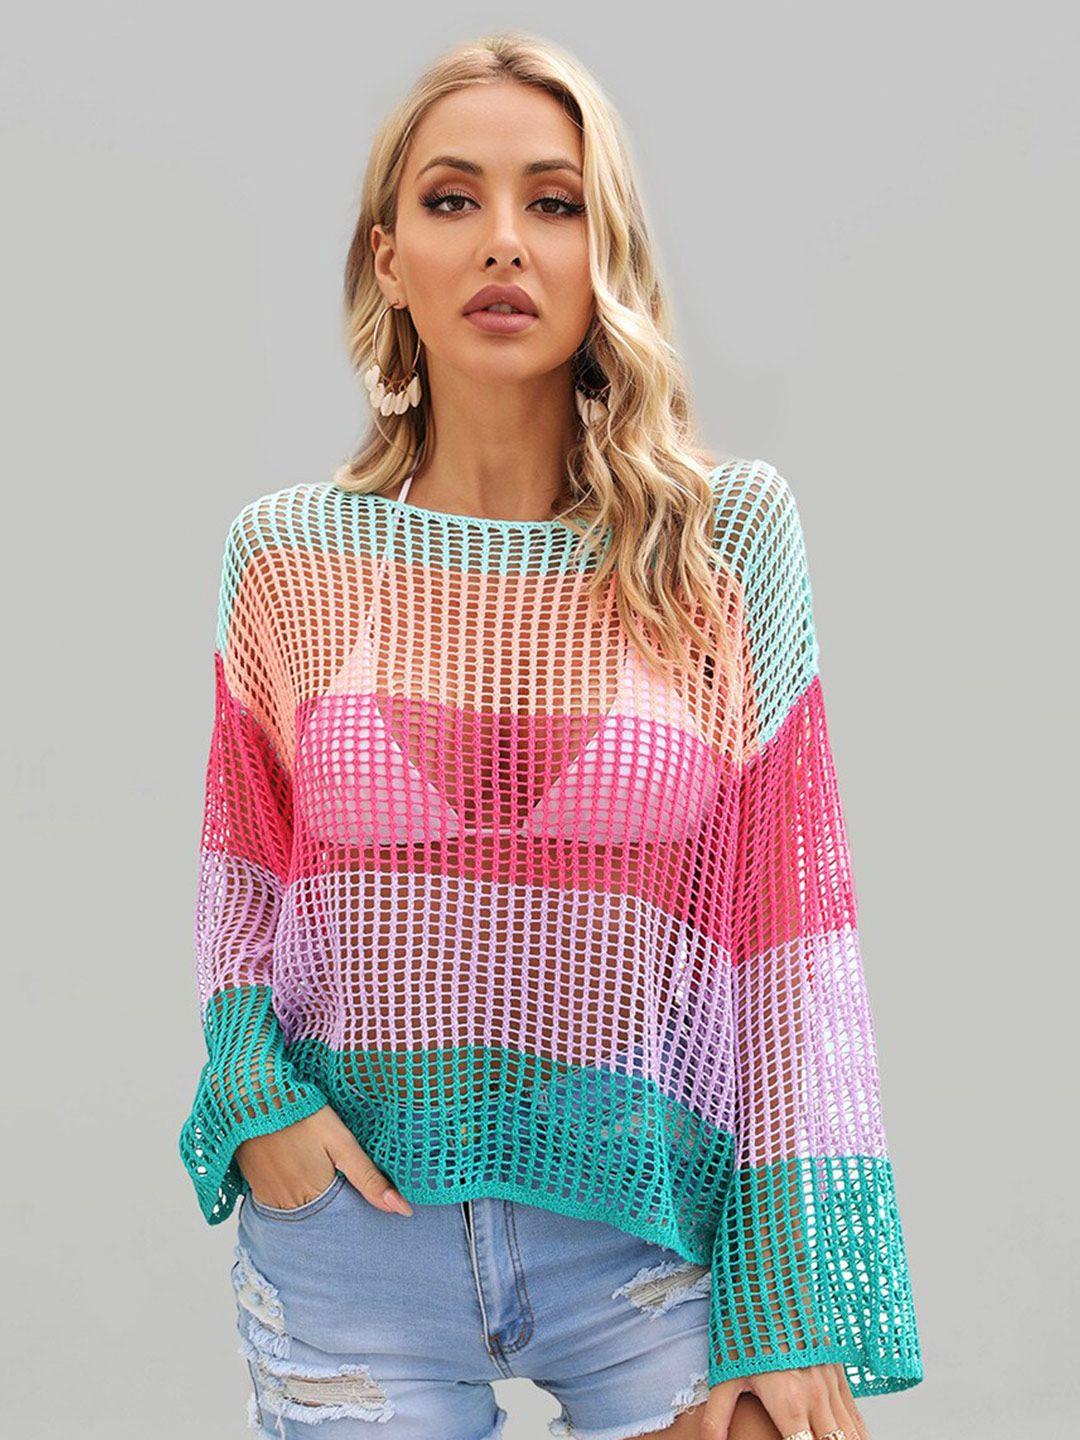 jc collection knitted sheer colourblocked bell sleeves top